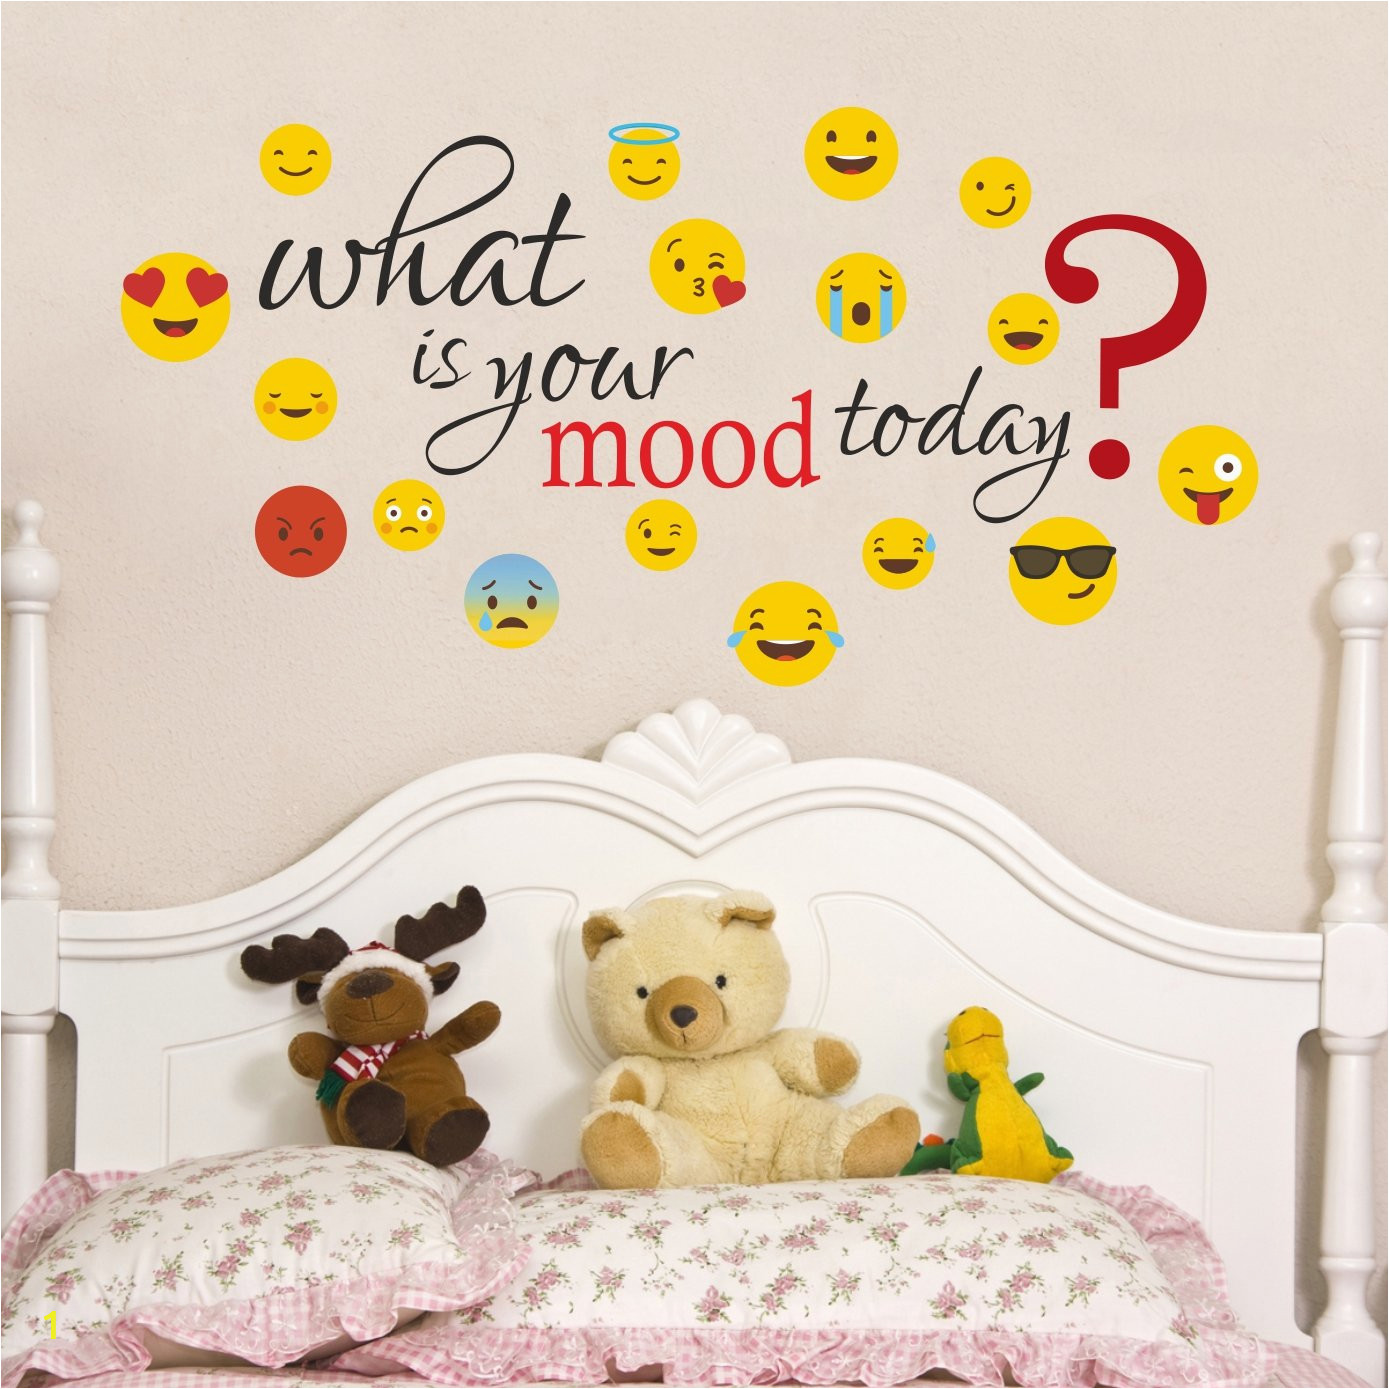 Wall Mural Stickers Singapore Buy Creatick Studio What is Your Mood today Smiley Wall